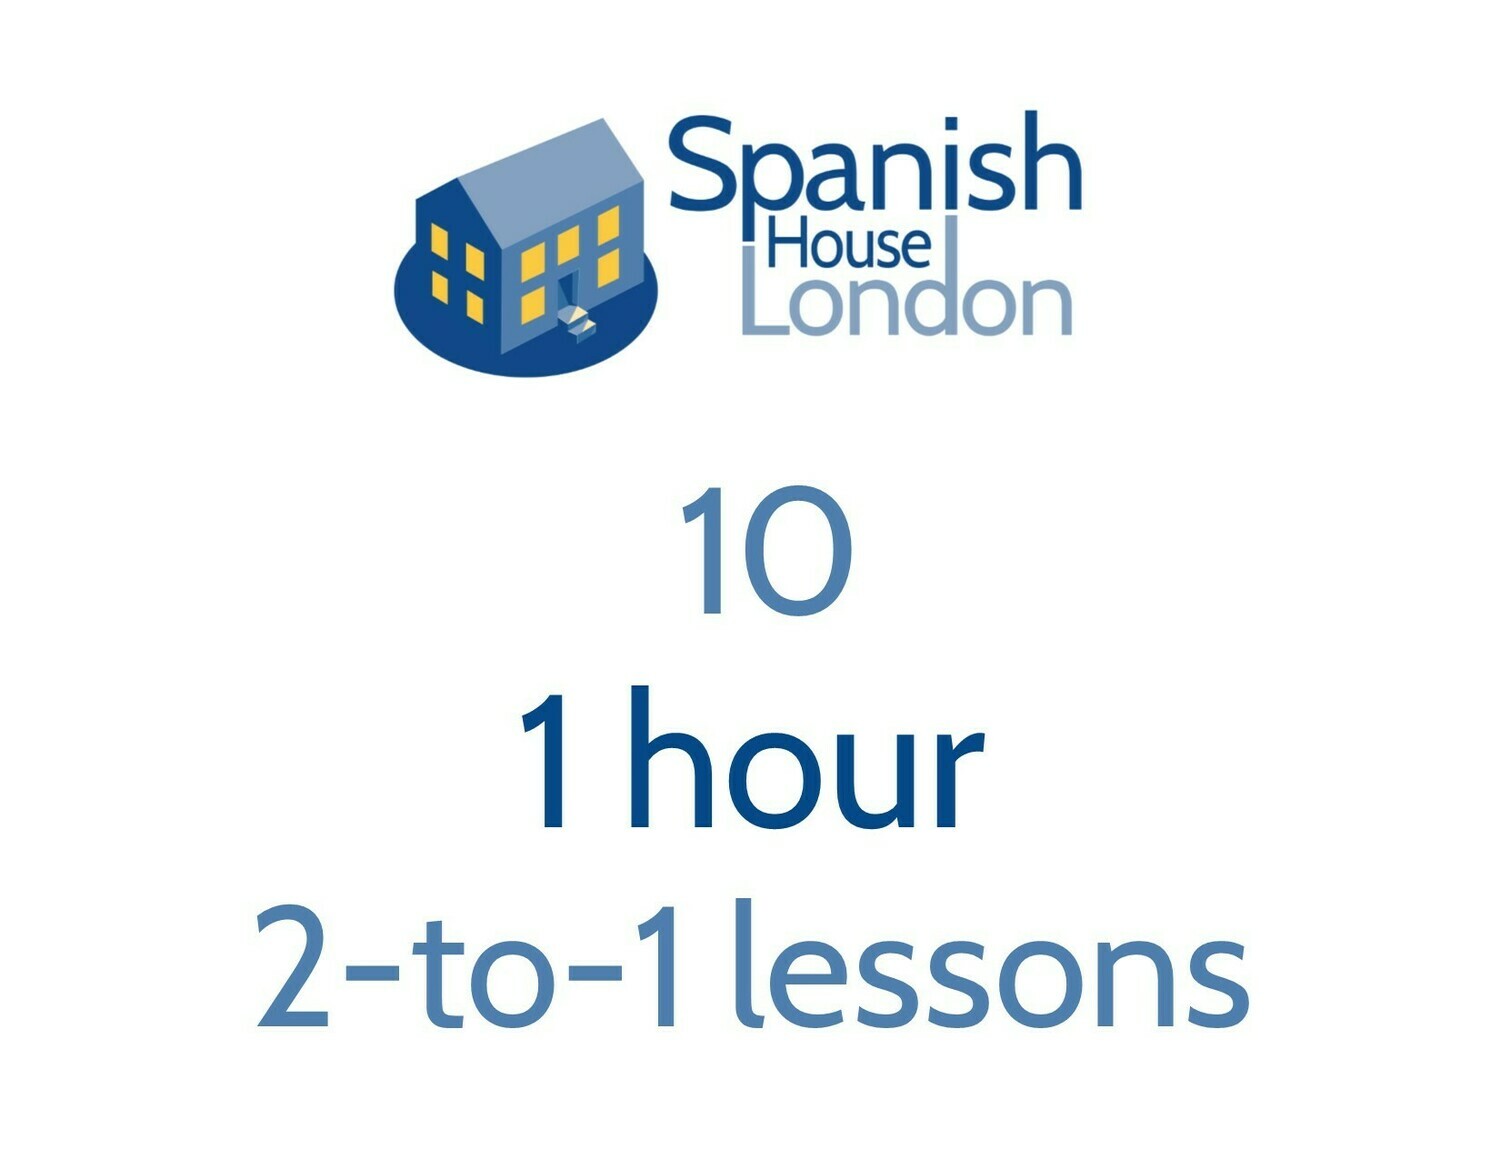 Ten 1-hour 2-to-1 lessons